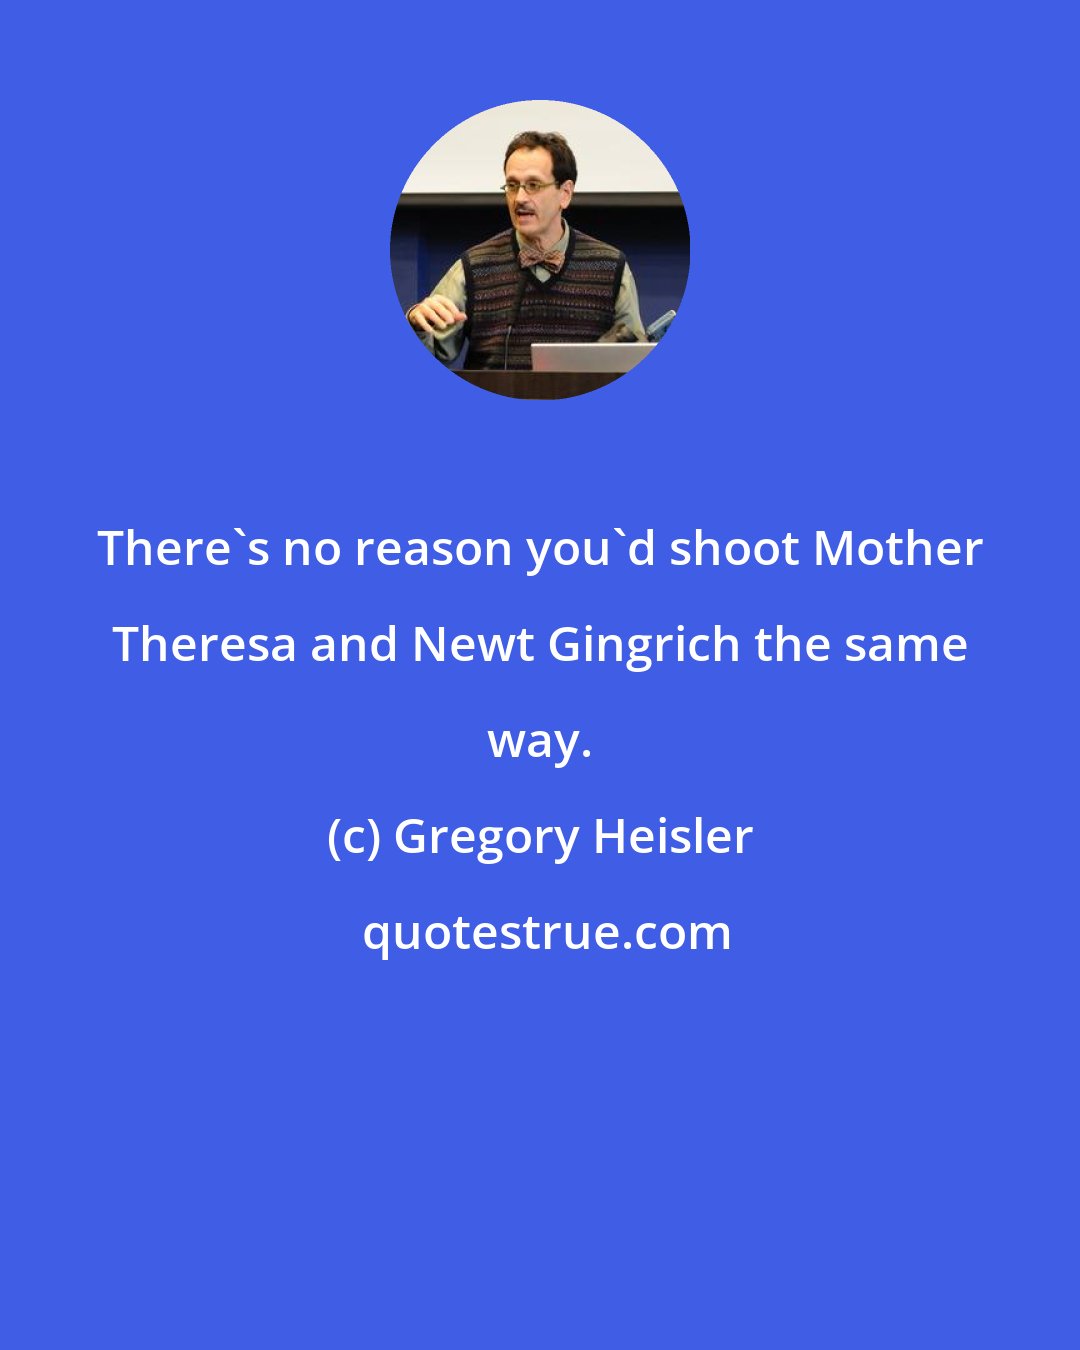 Gregory Heisler: There's no reason you'd shoot Mother Theresa and Newt Gingrich the same way.